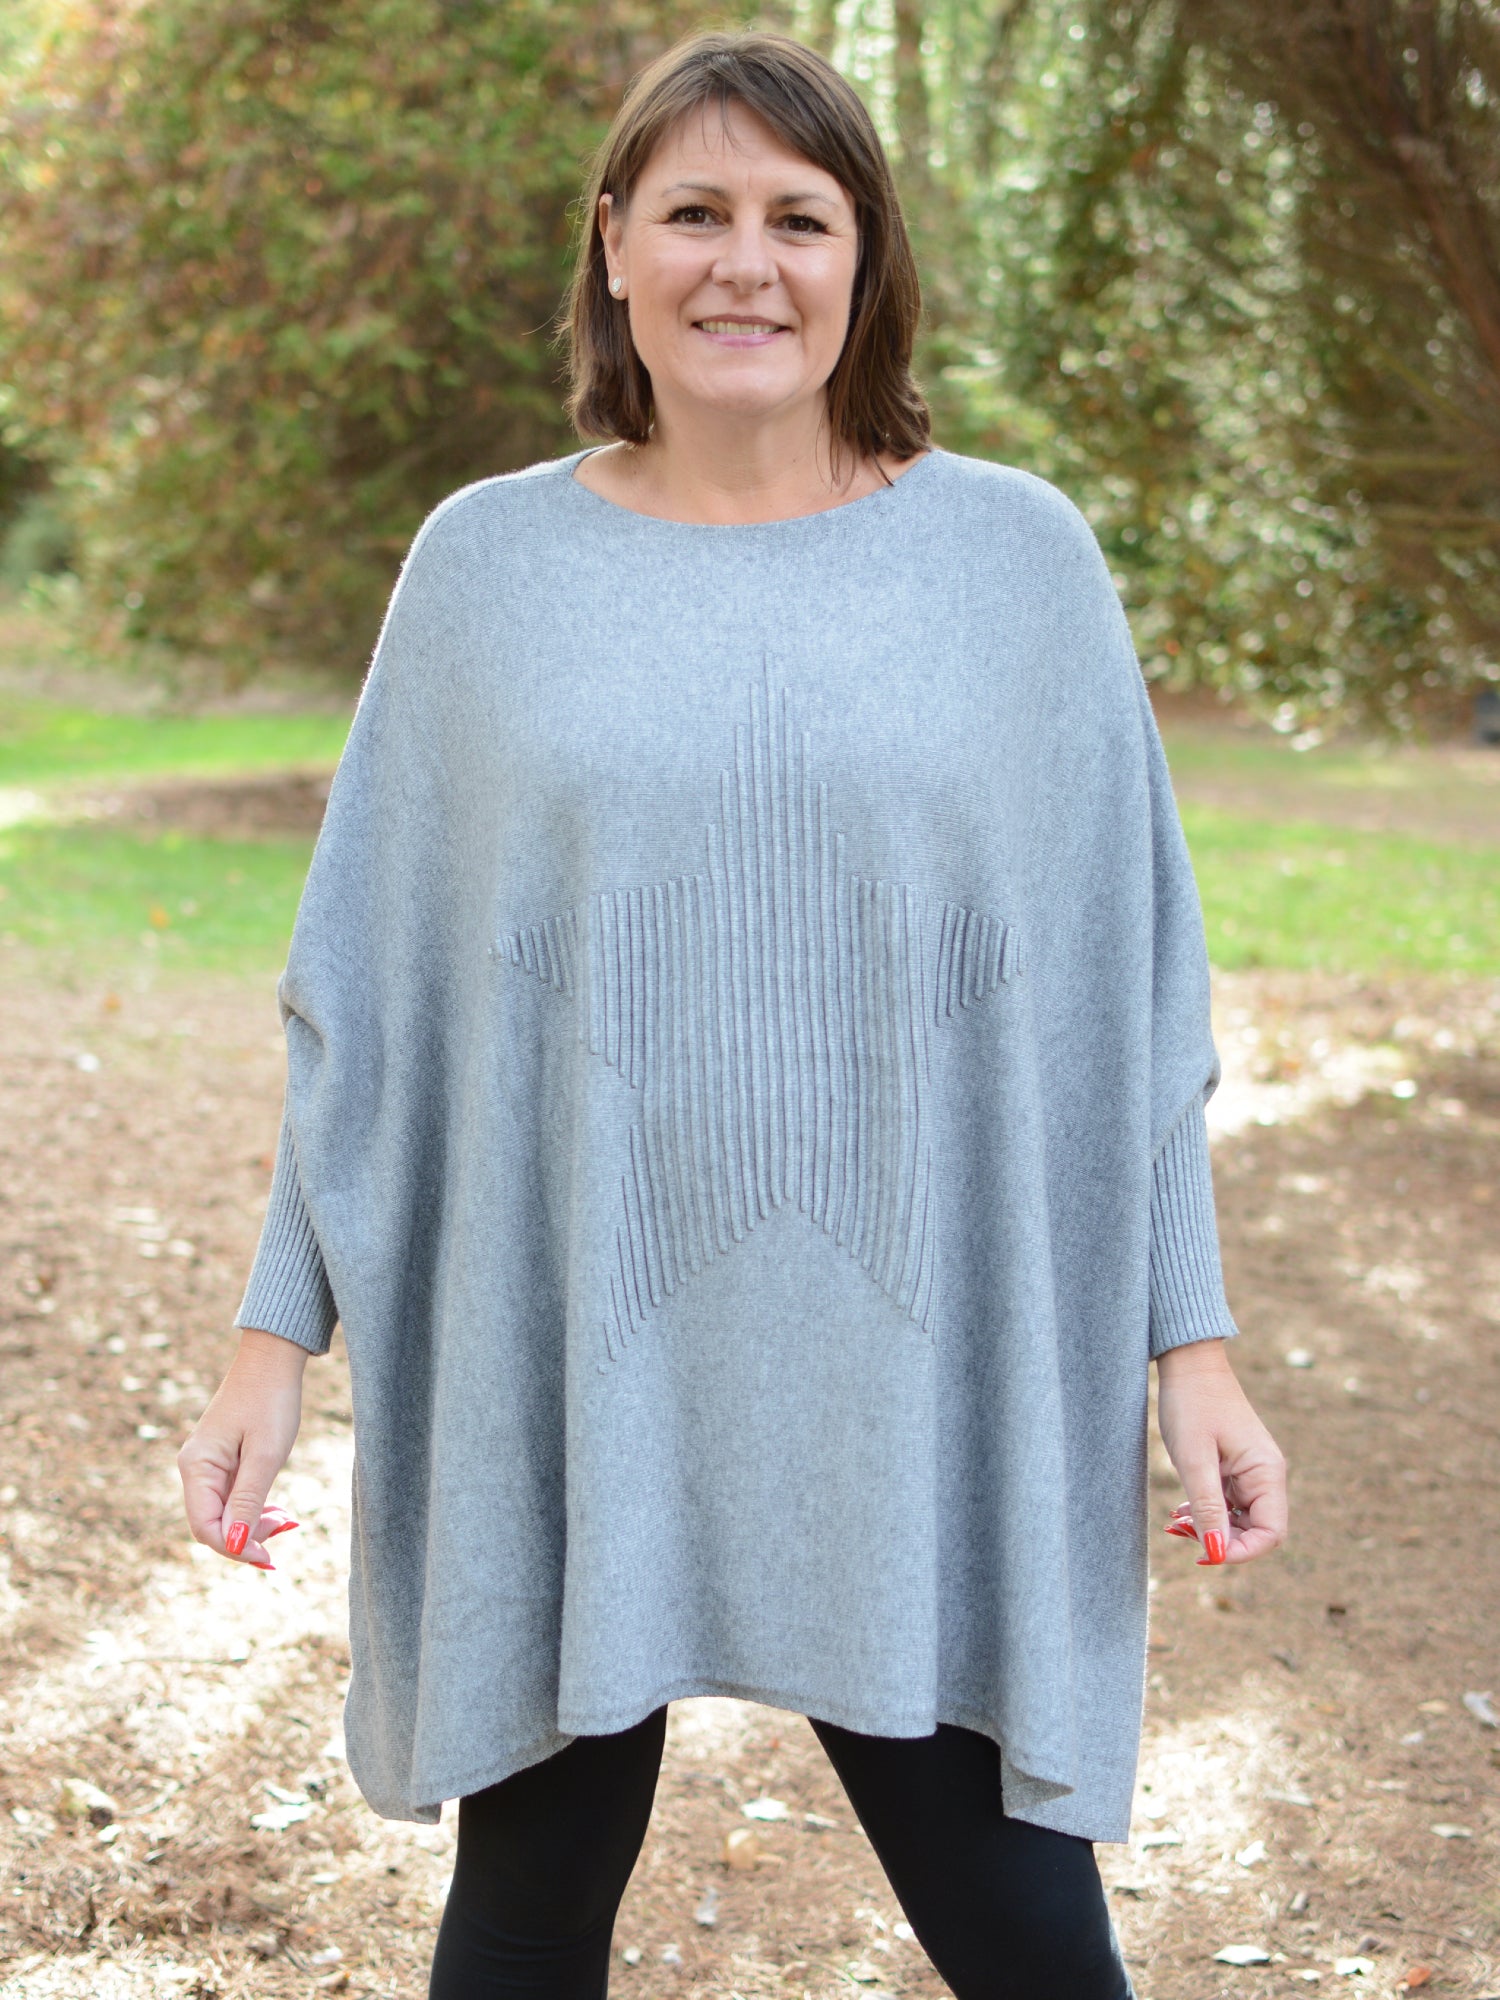 Soft Knit Batwing Sleeve Jumper with Star design - 3600, Jumpers & Cardigans, Pure Plus Clothing, Lagenlook Clothing, Plus Size Fashion, Over 50 Fashion